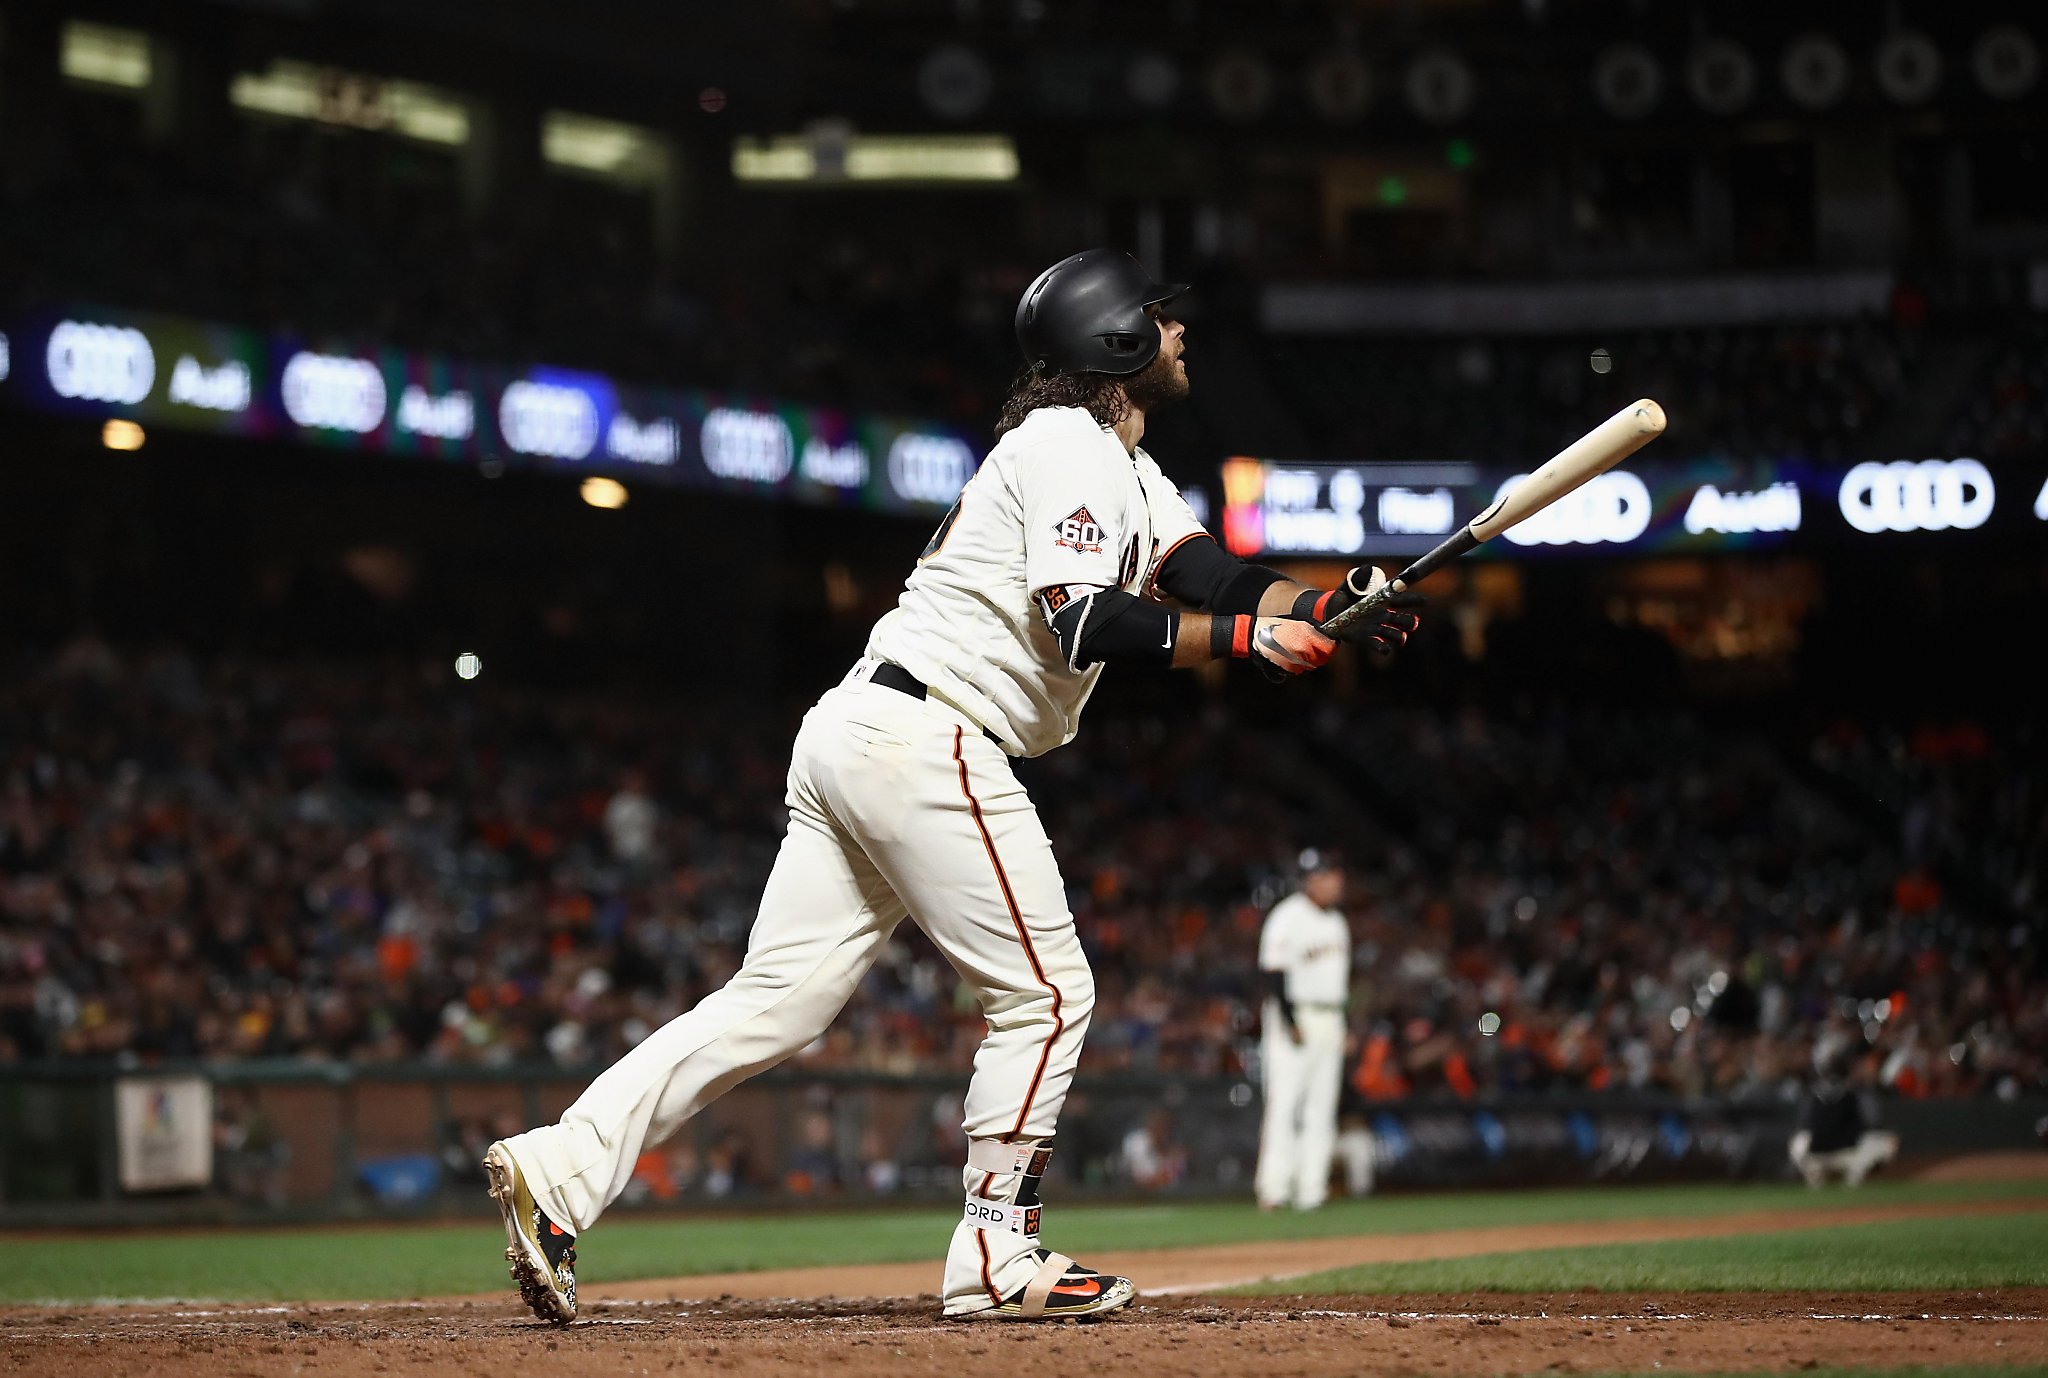 June 27, 2018: Brandon Crawford's HR in ninth gives Giants 1-0 win